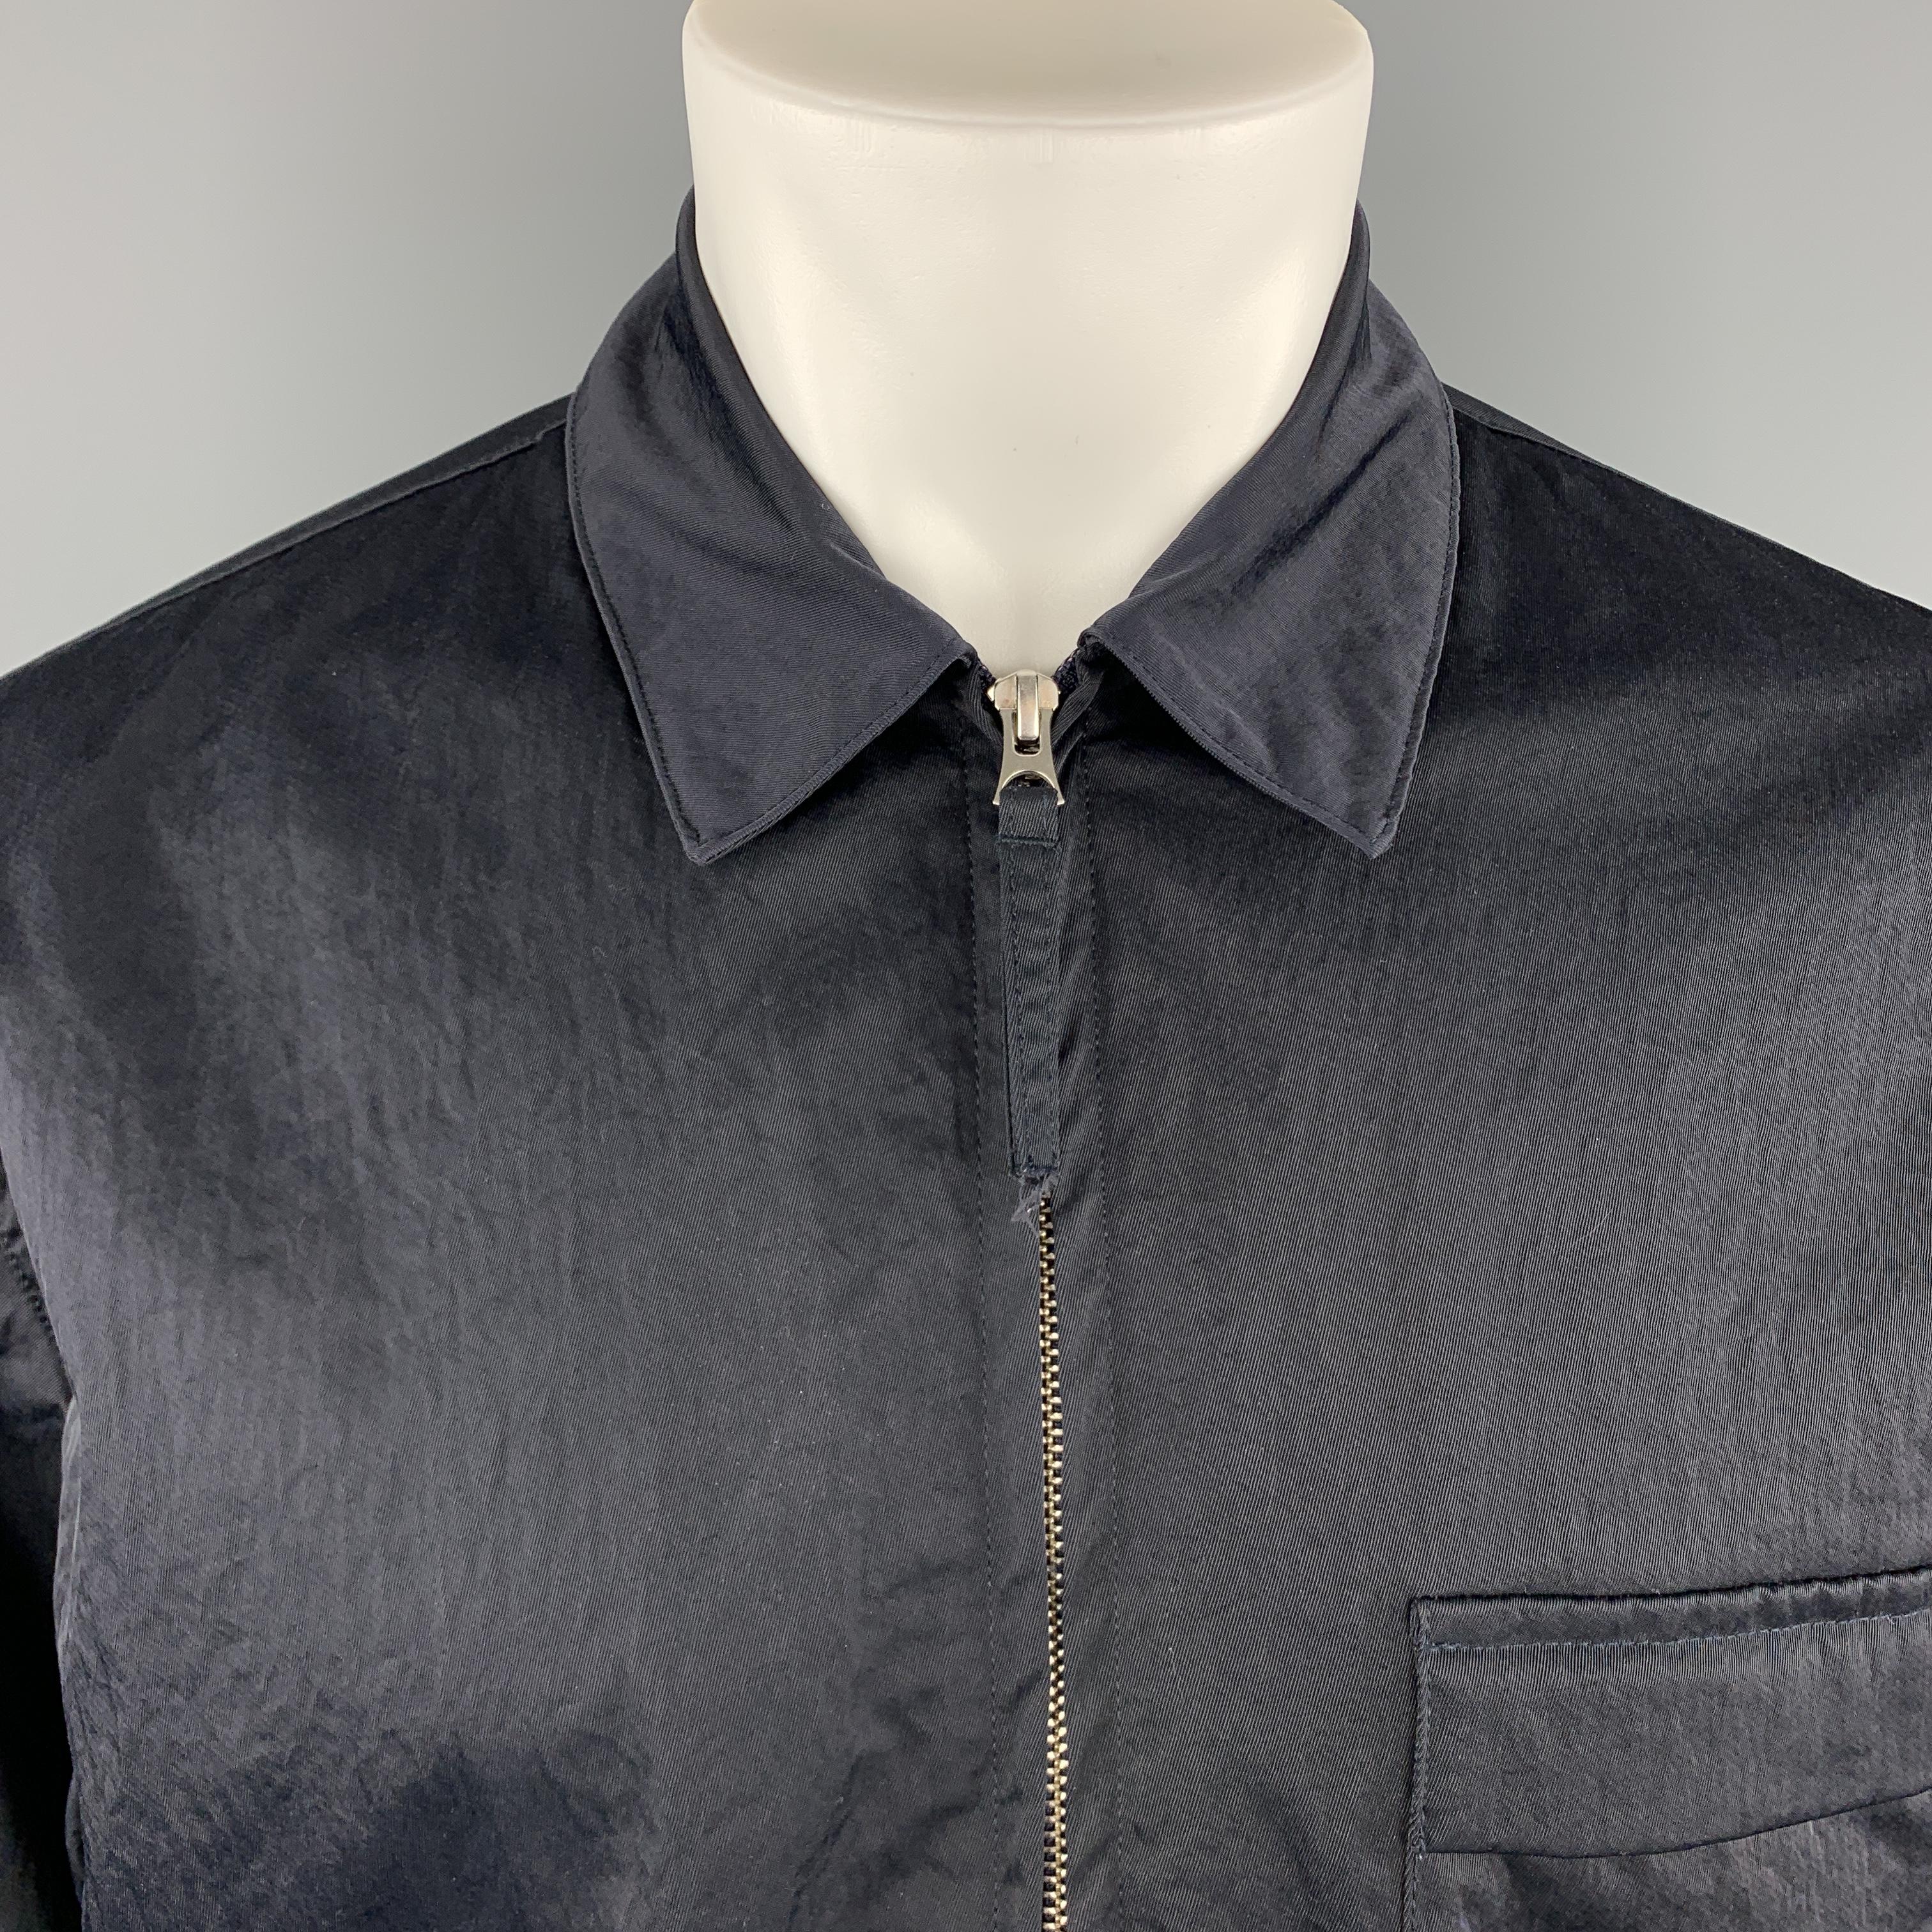 OUR LEGACY jacket comes in navy textured nylon wih a pointed collar, zip front, and flap pocket. Made in Portugal.

Excellent Pre-Owned Condition.
Marked: IT 48

Measurements:

Shoulder: 18 in.
Chest: 45 in.
Sleeve: 25.5 in.
Length: 29 in.